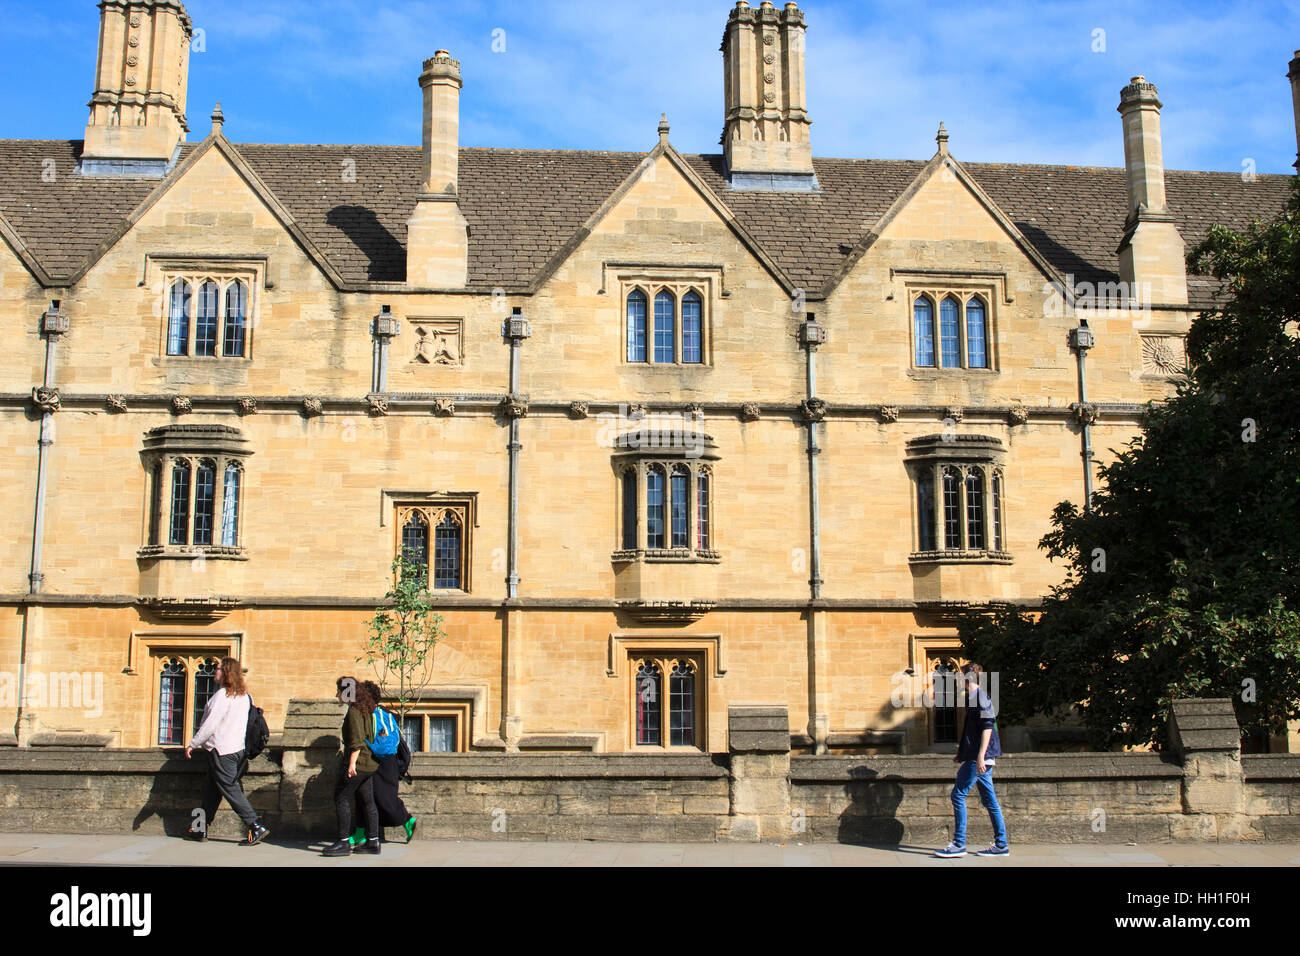 Detail of Magdalen College as seen from High Street, Oxford, England. Stock Photo